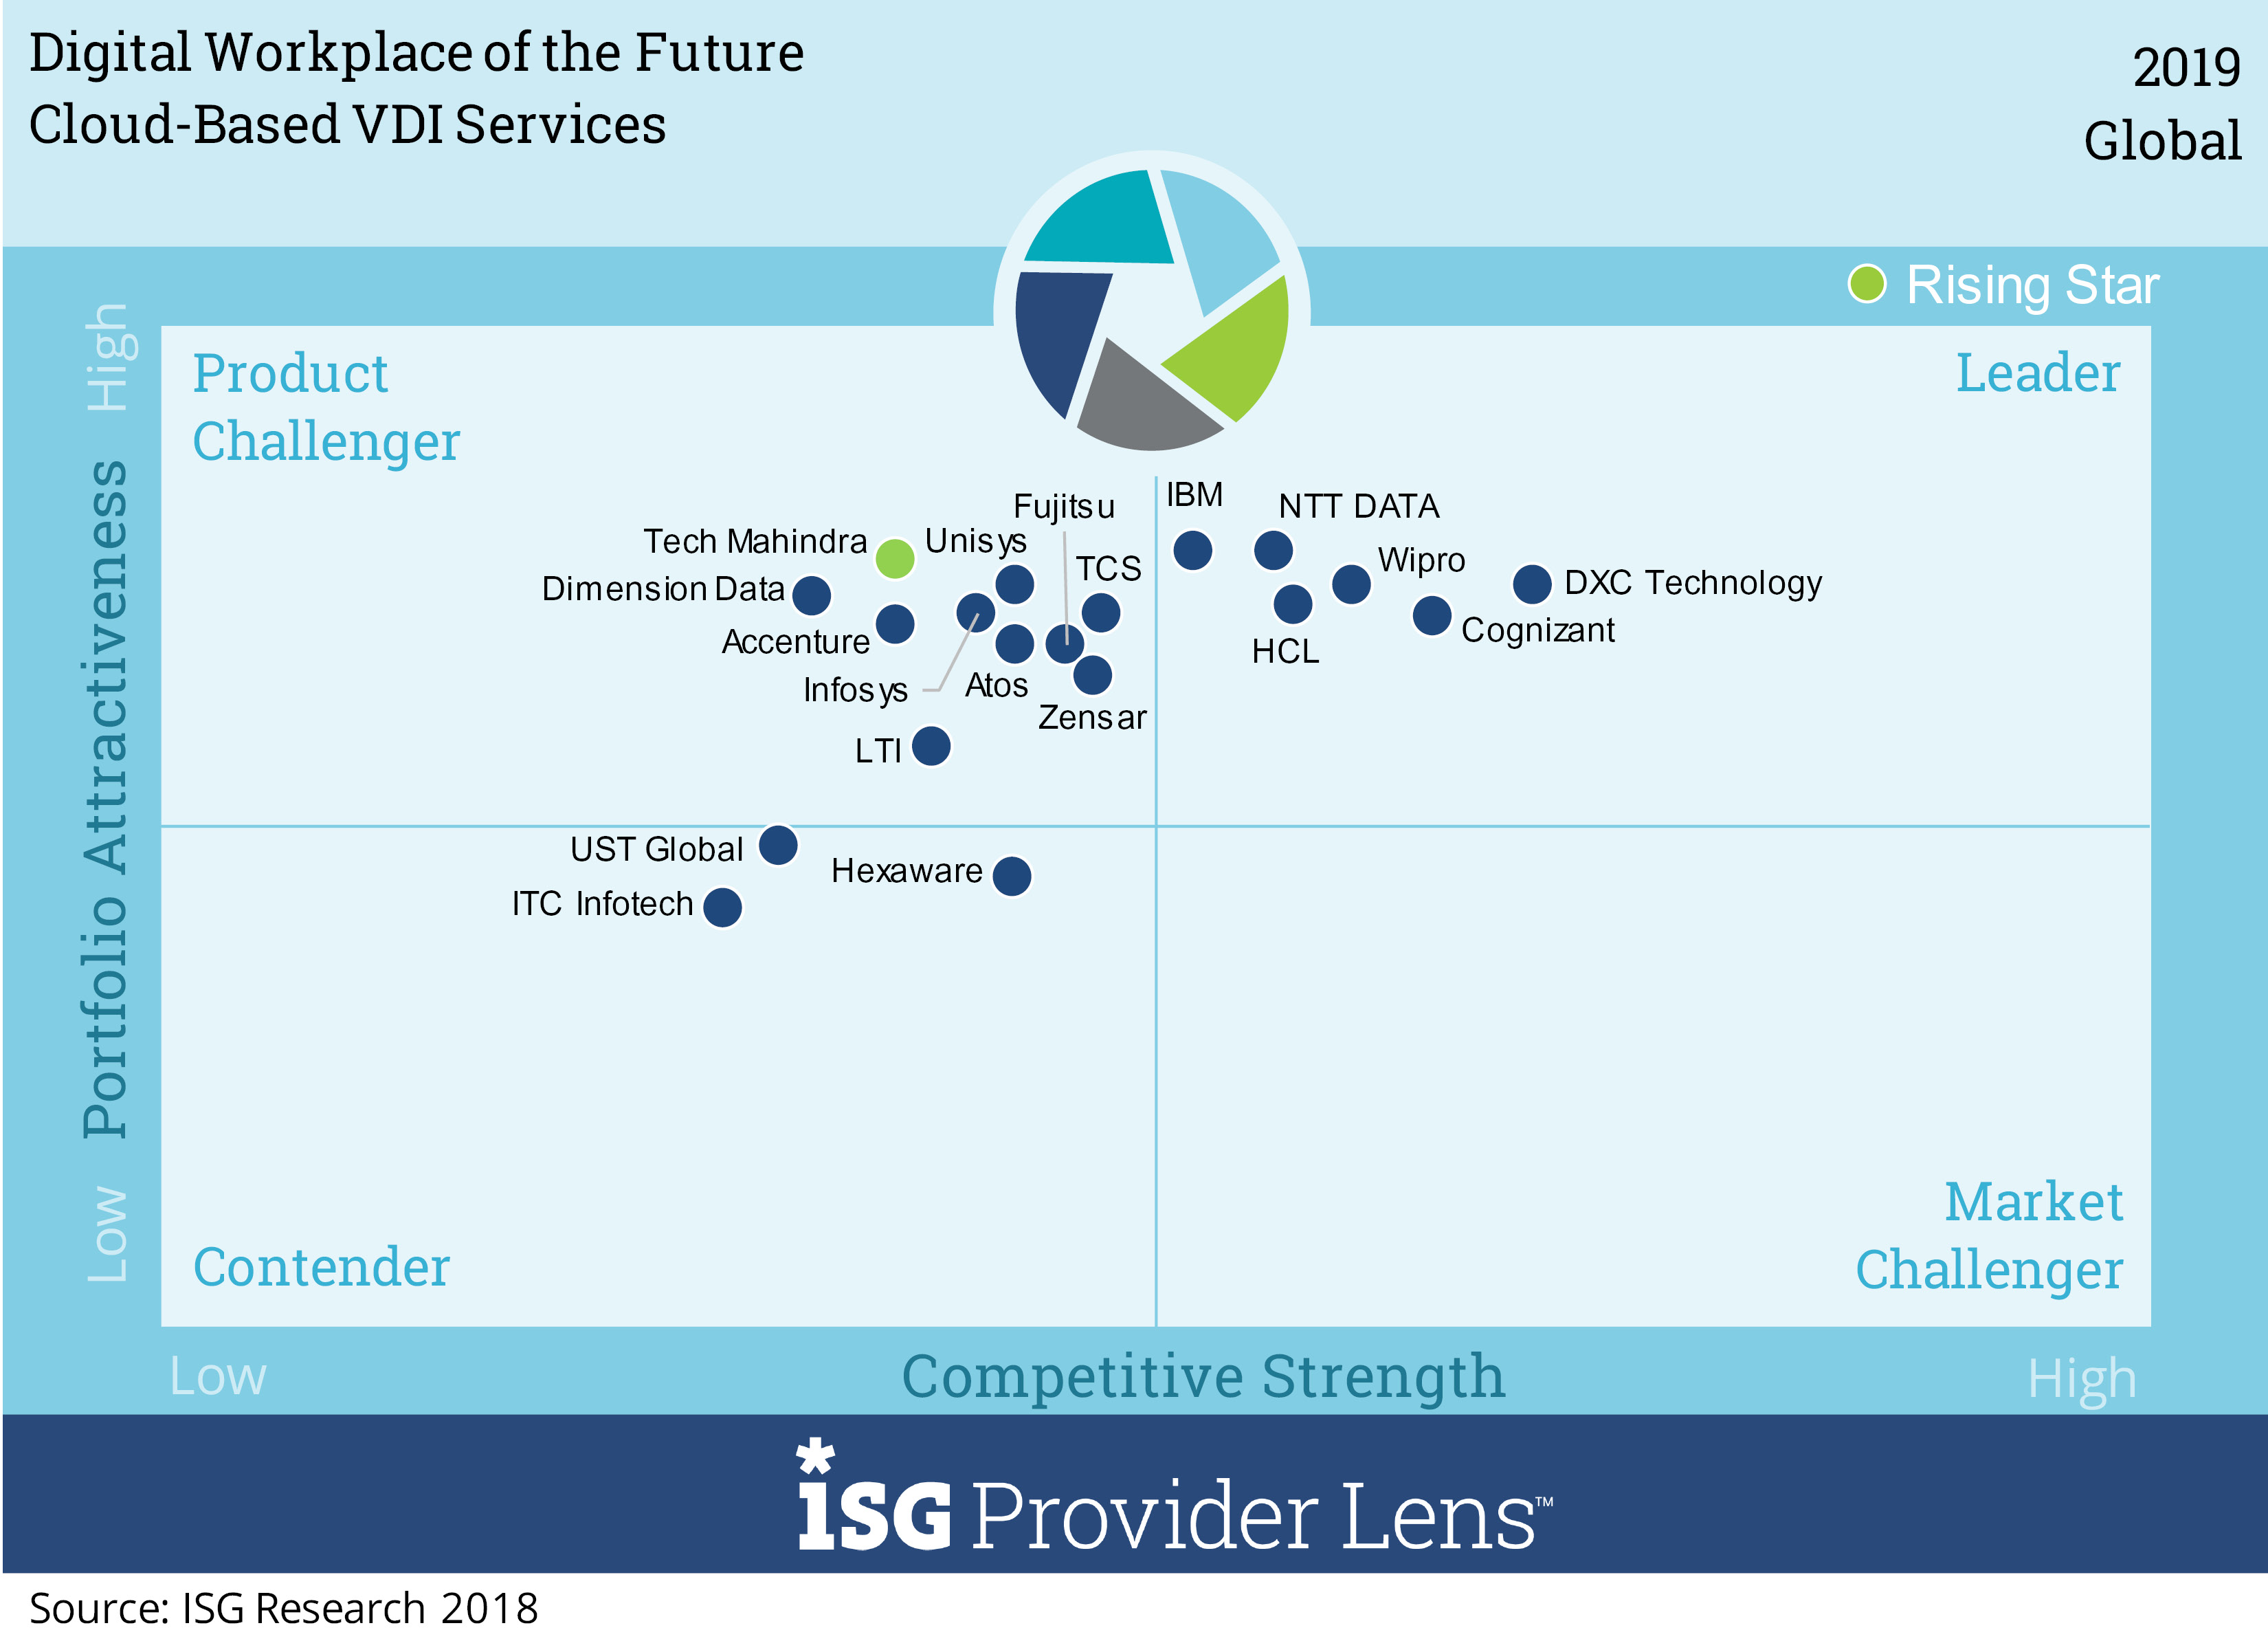 Wipro has been positioned as a Global Leader in Digital Workplace of the Future ISG Provider Lens study 2019